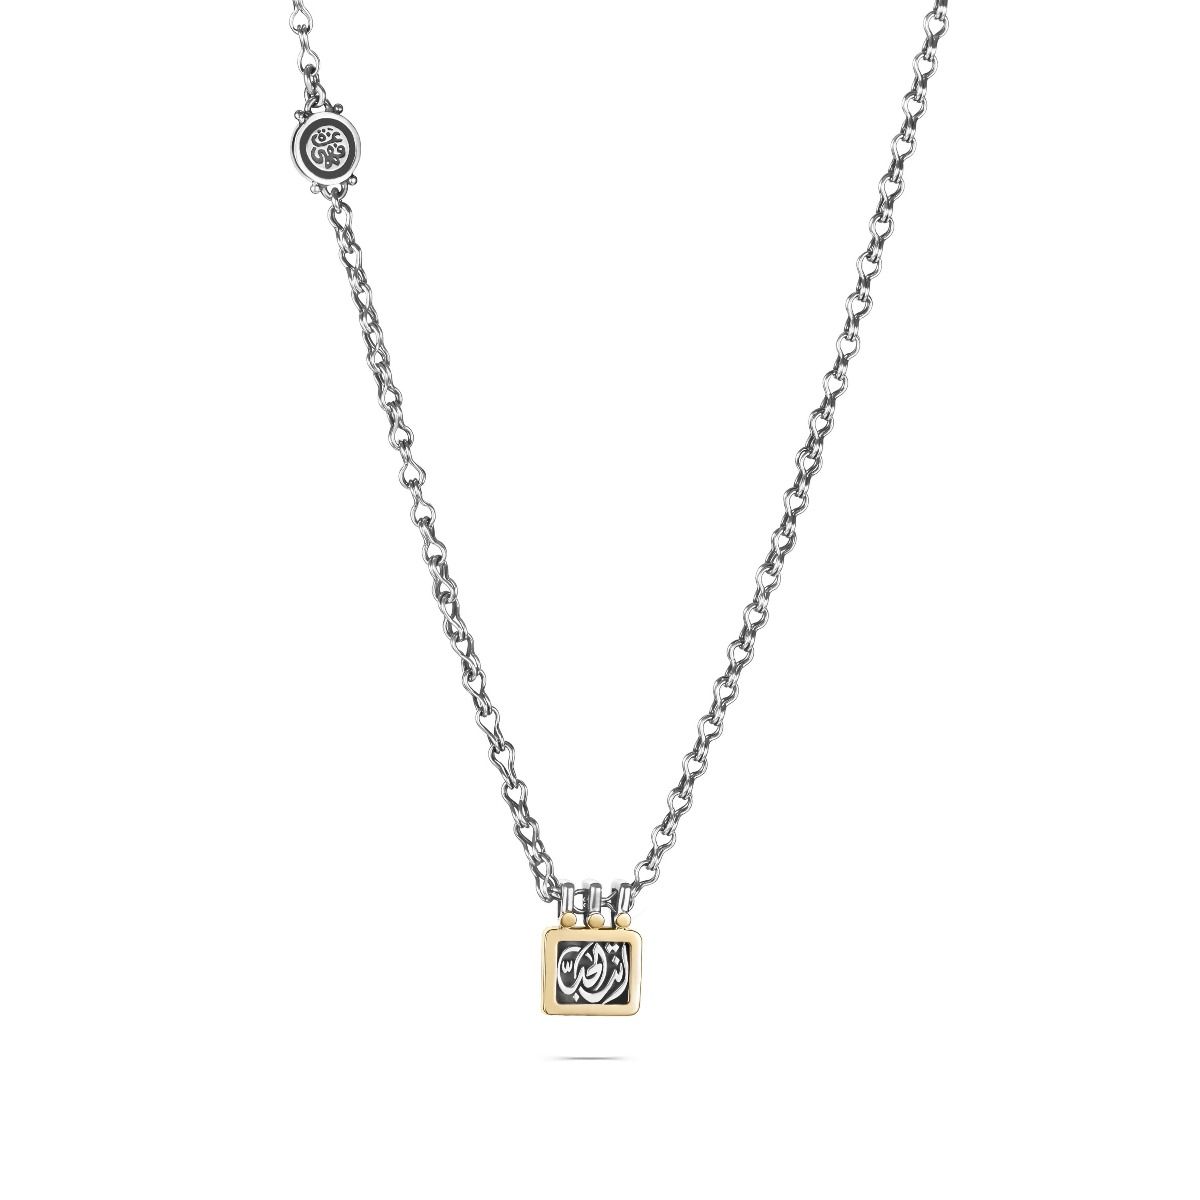 You Are The One Necklace by Azza Fahmy - Designer Necklaces